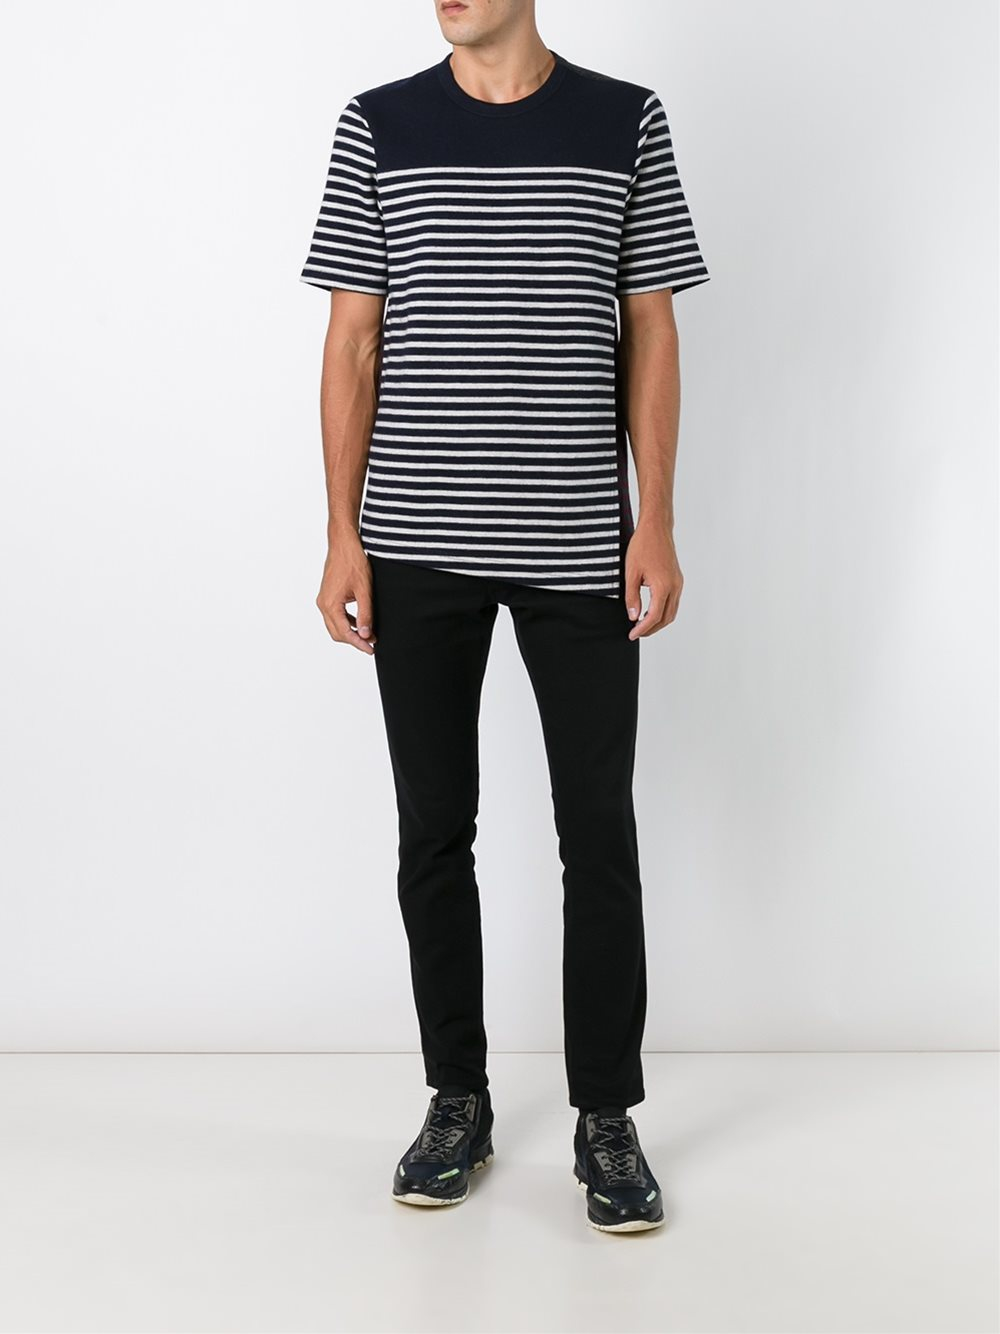 Lyst - Marni Striped T-shirt in Blue for Men